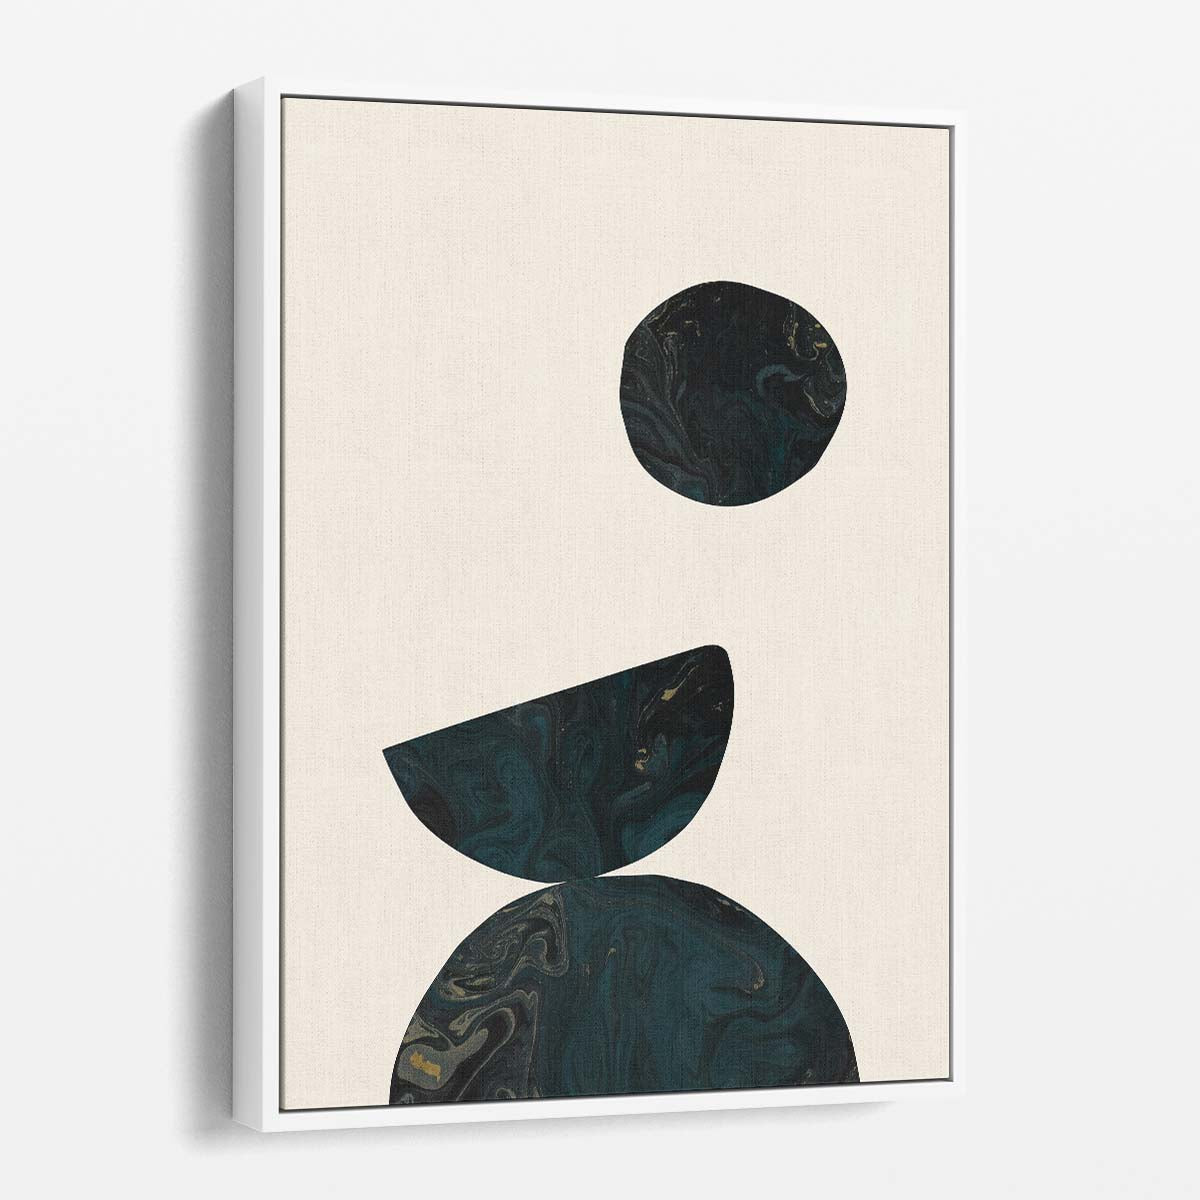 Mid-Century Minimalist Geometric Abstract Illustration Wall Art by Luxuriance Designs, made in USA